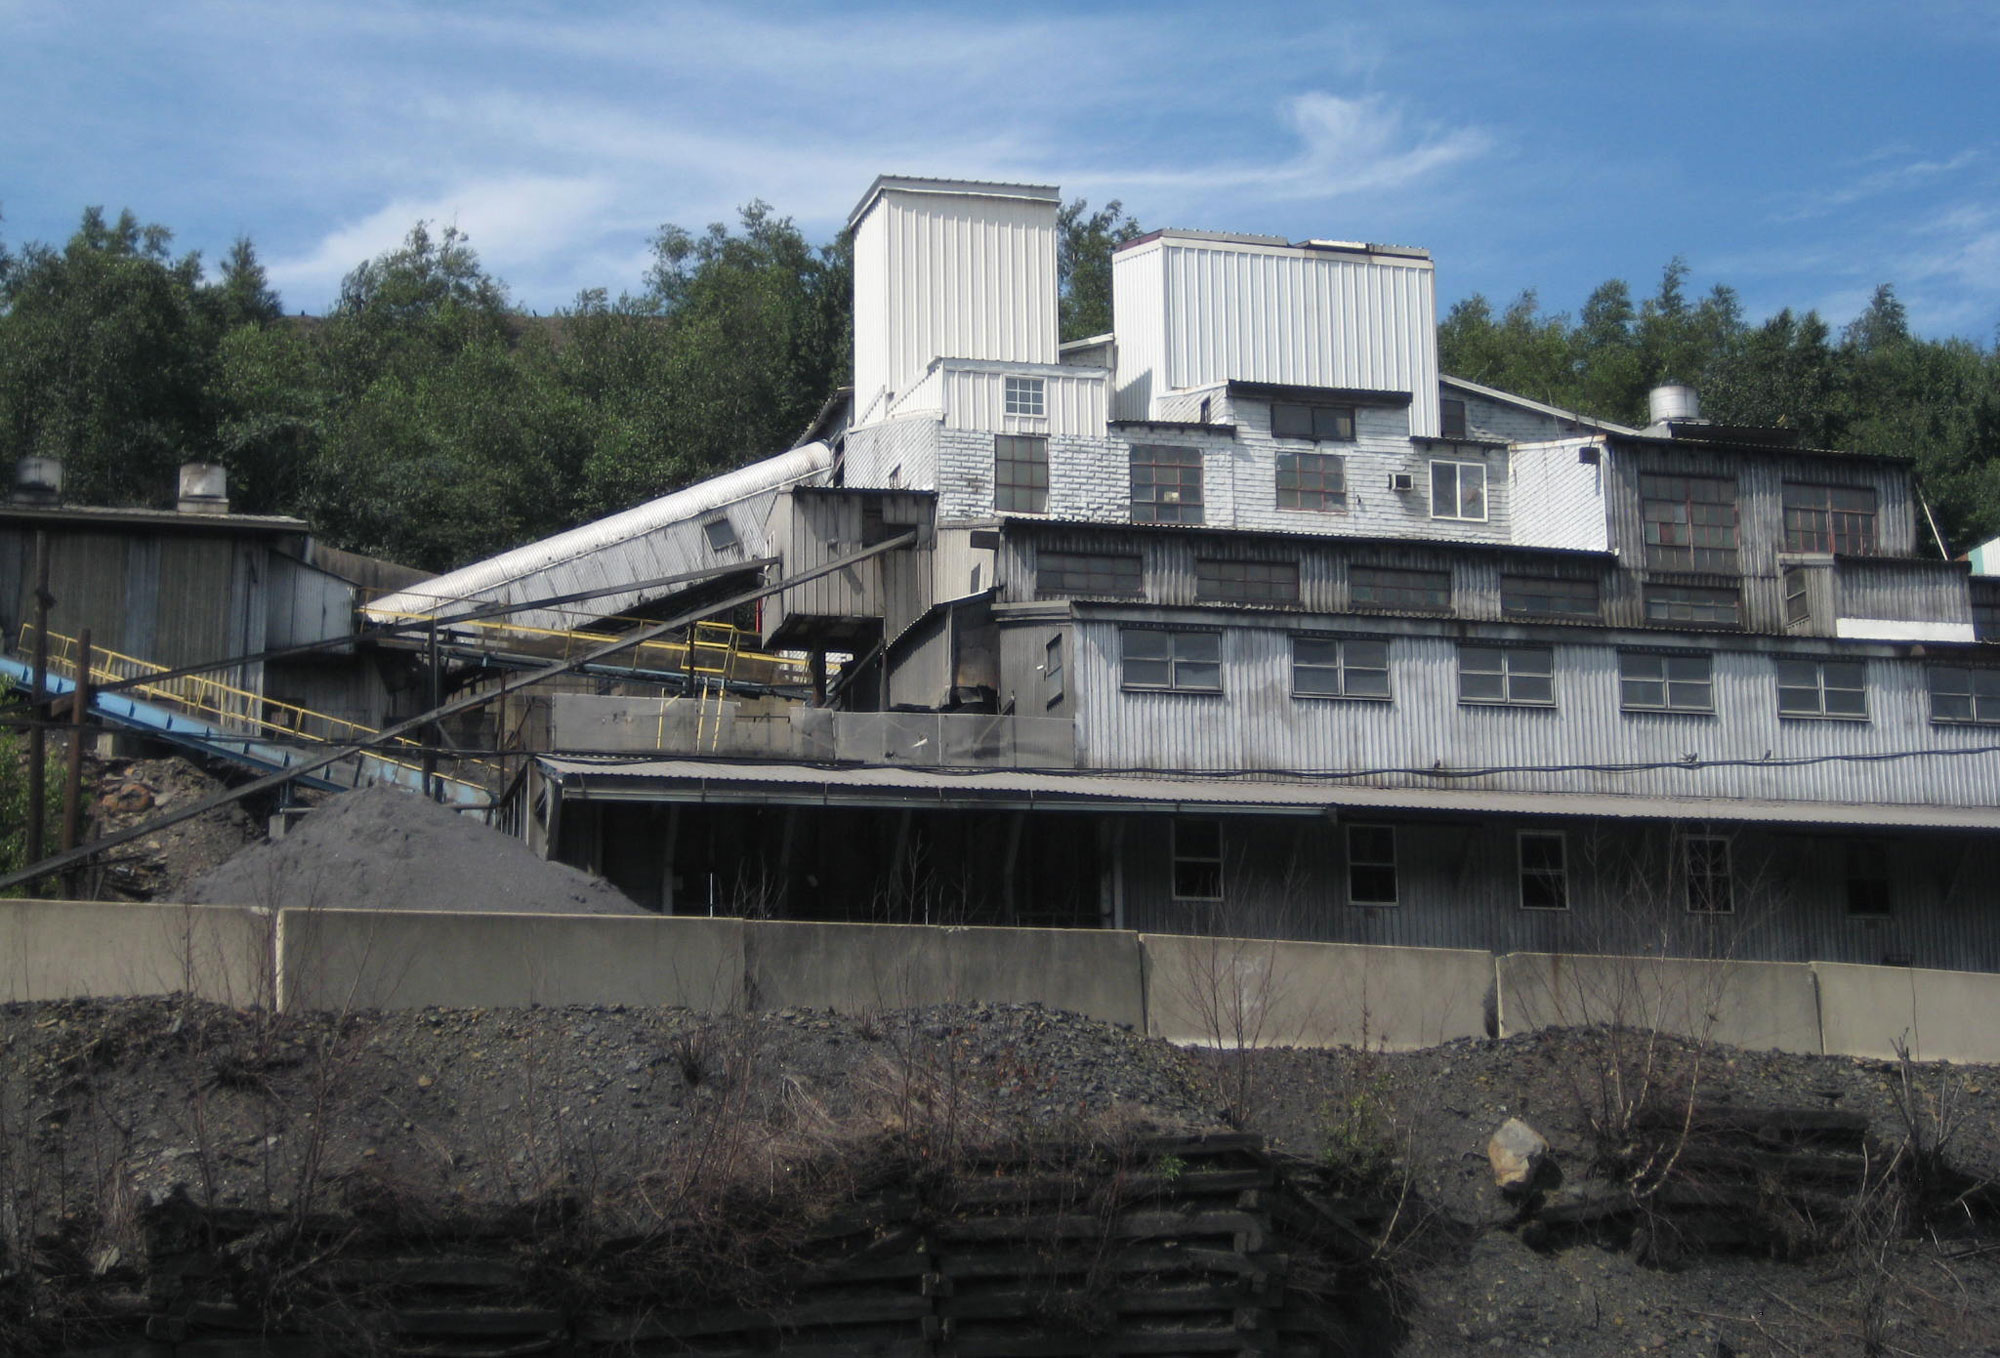 Photograph of a modern coal breaker plant in Pennsylvania. The photo shows a building with white paneling behind a concrete barrier. A chute emerges from the left side of the building.